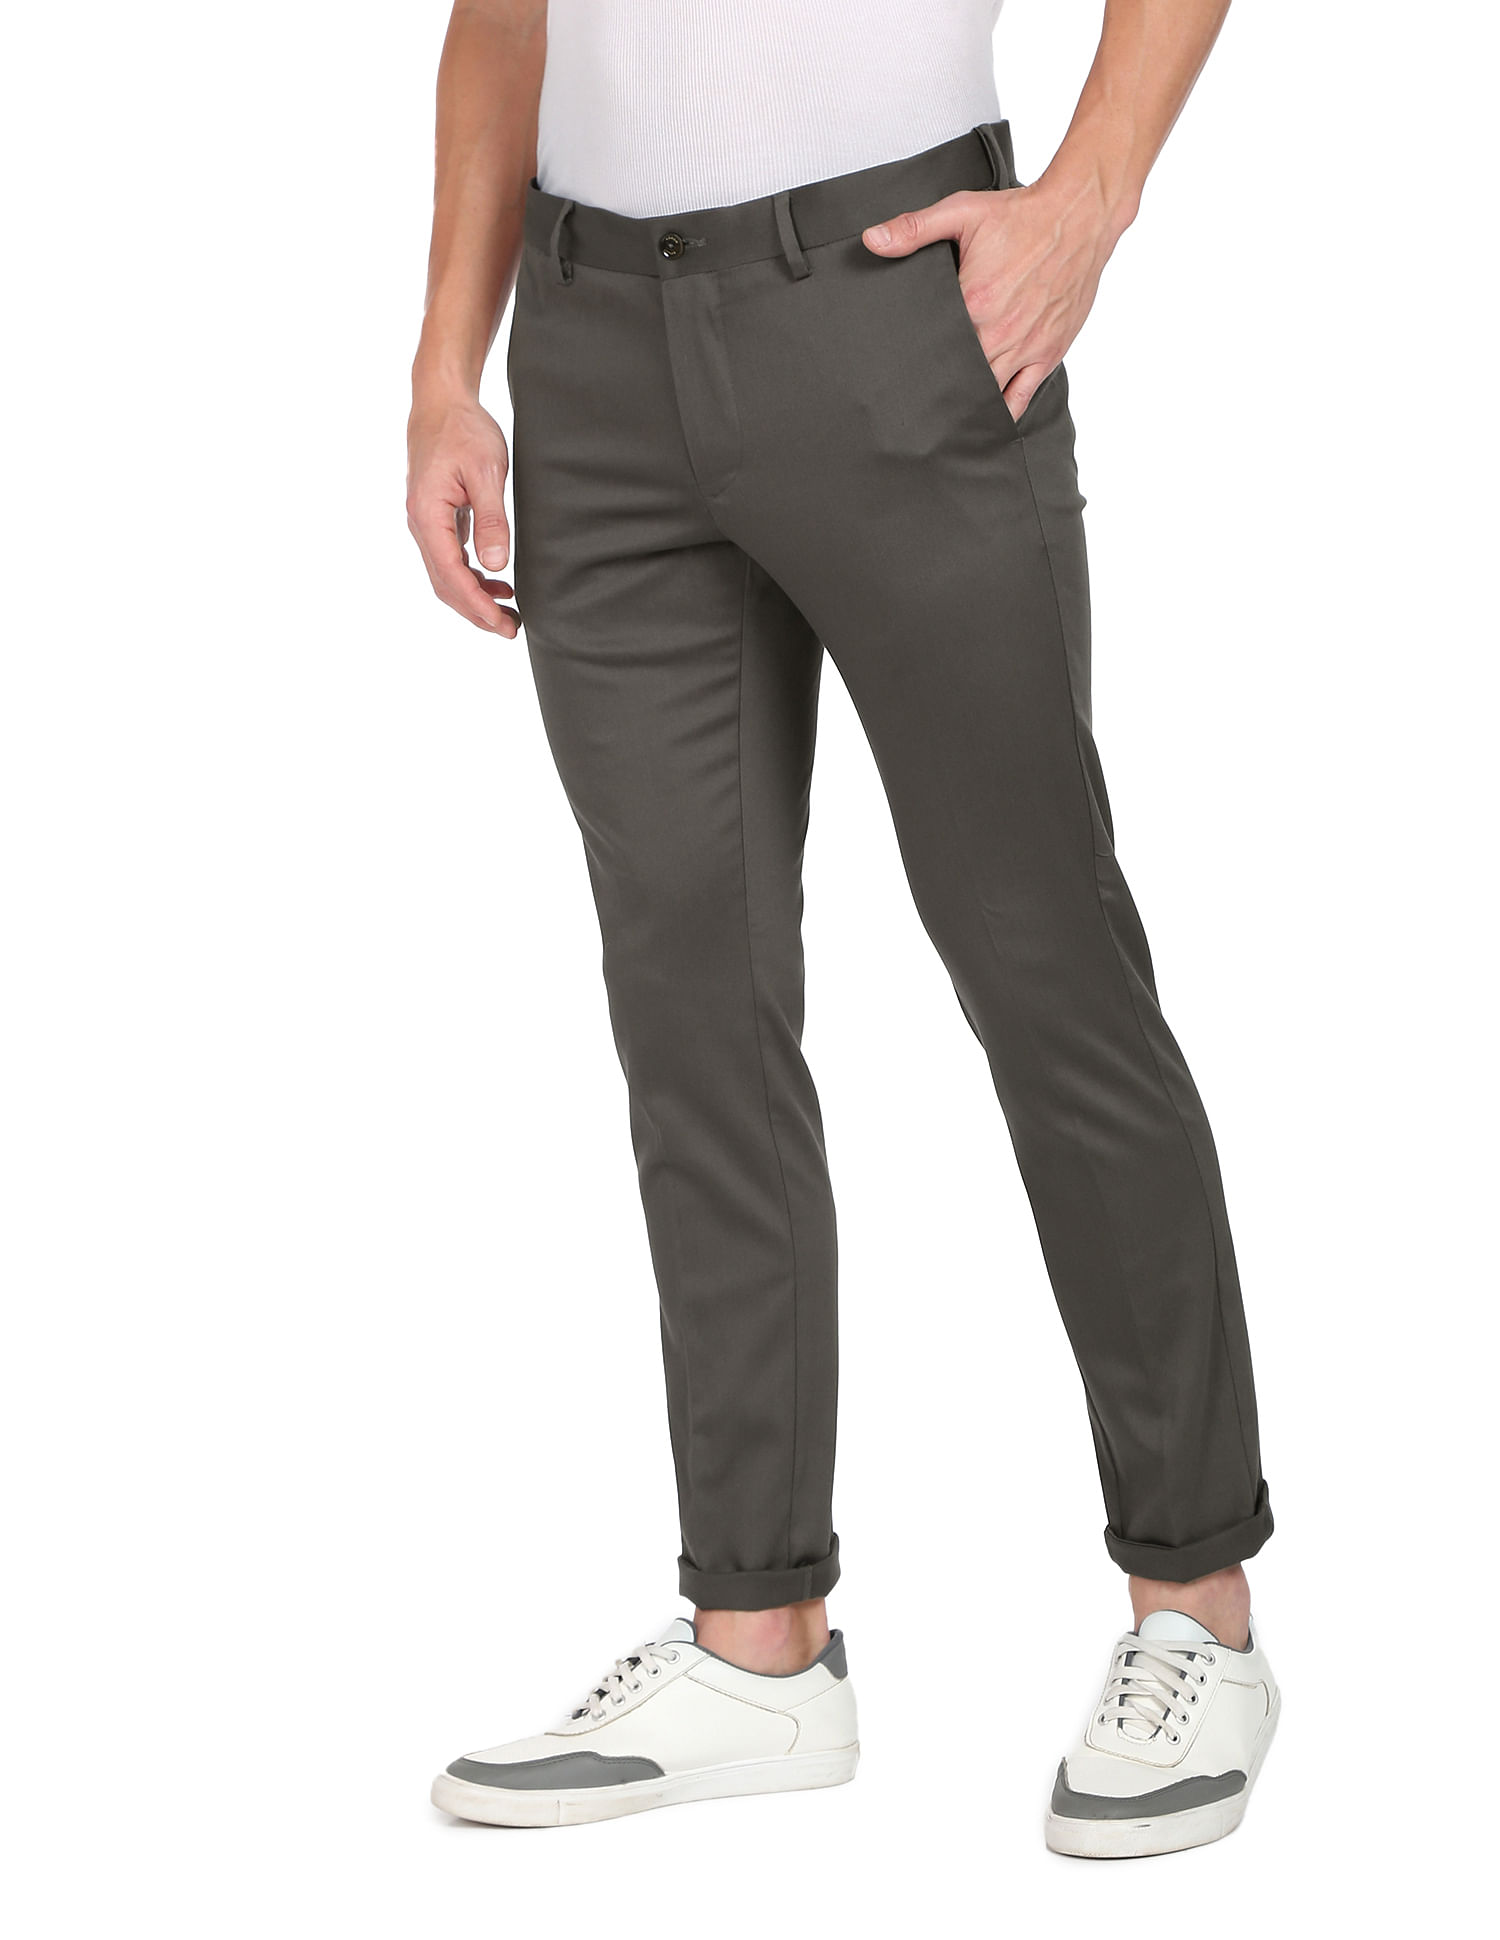 Buy Arrow Sports Slim Fit Textured Trousers Online